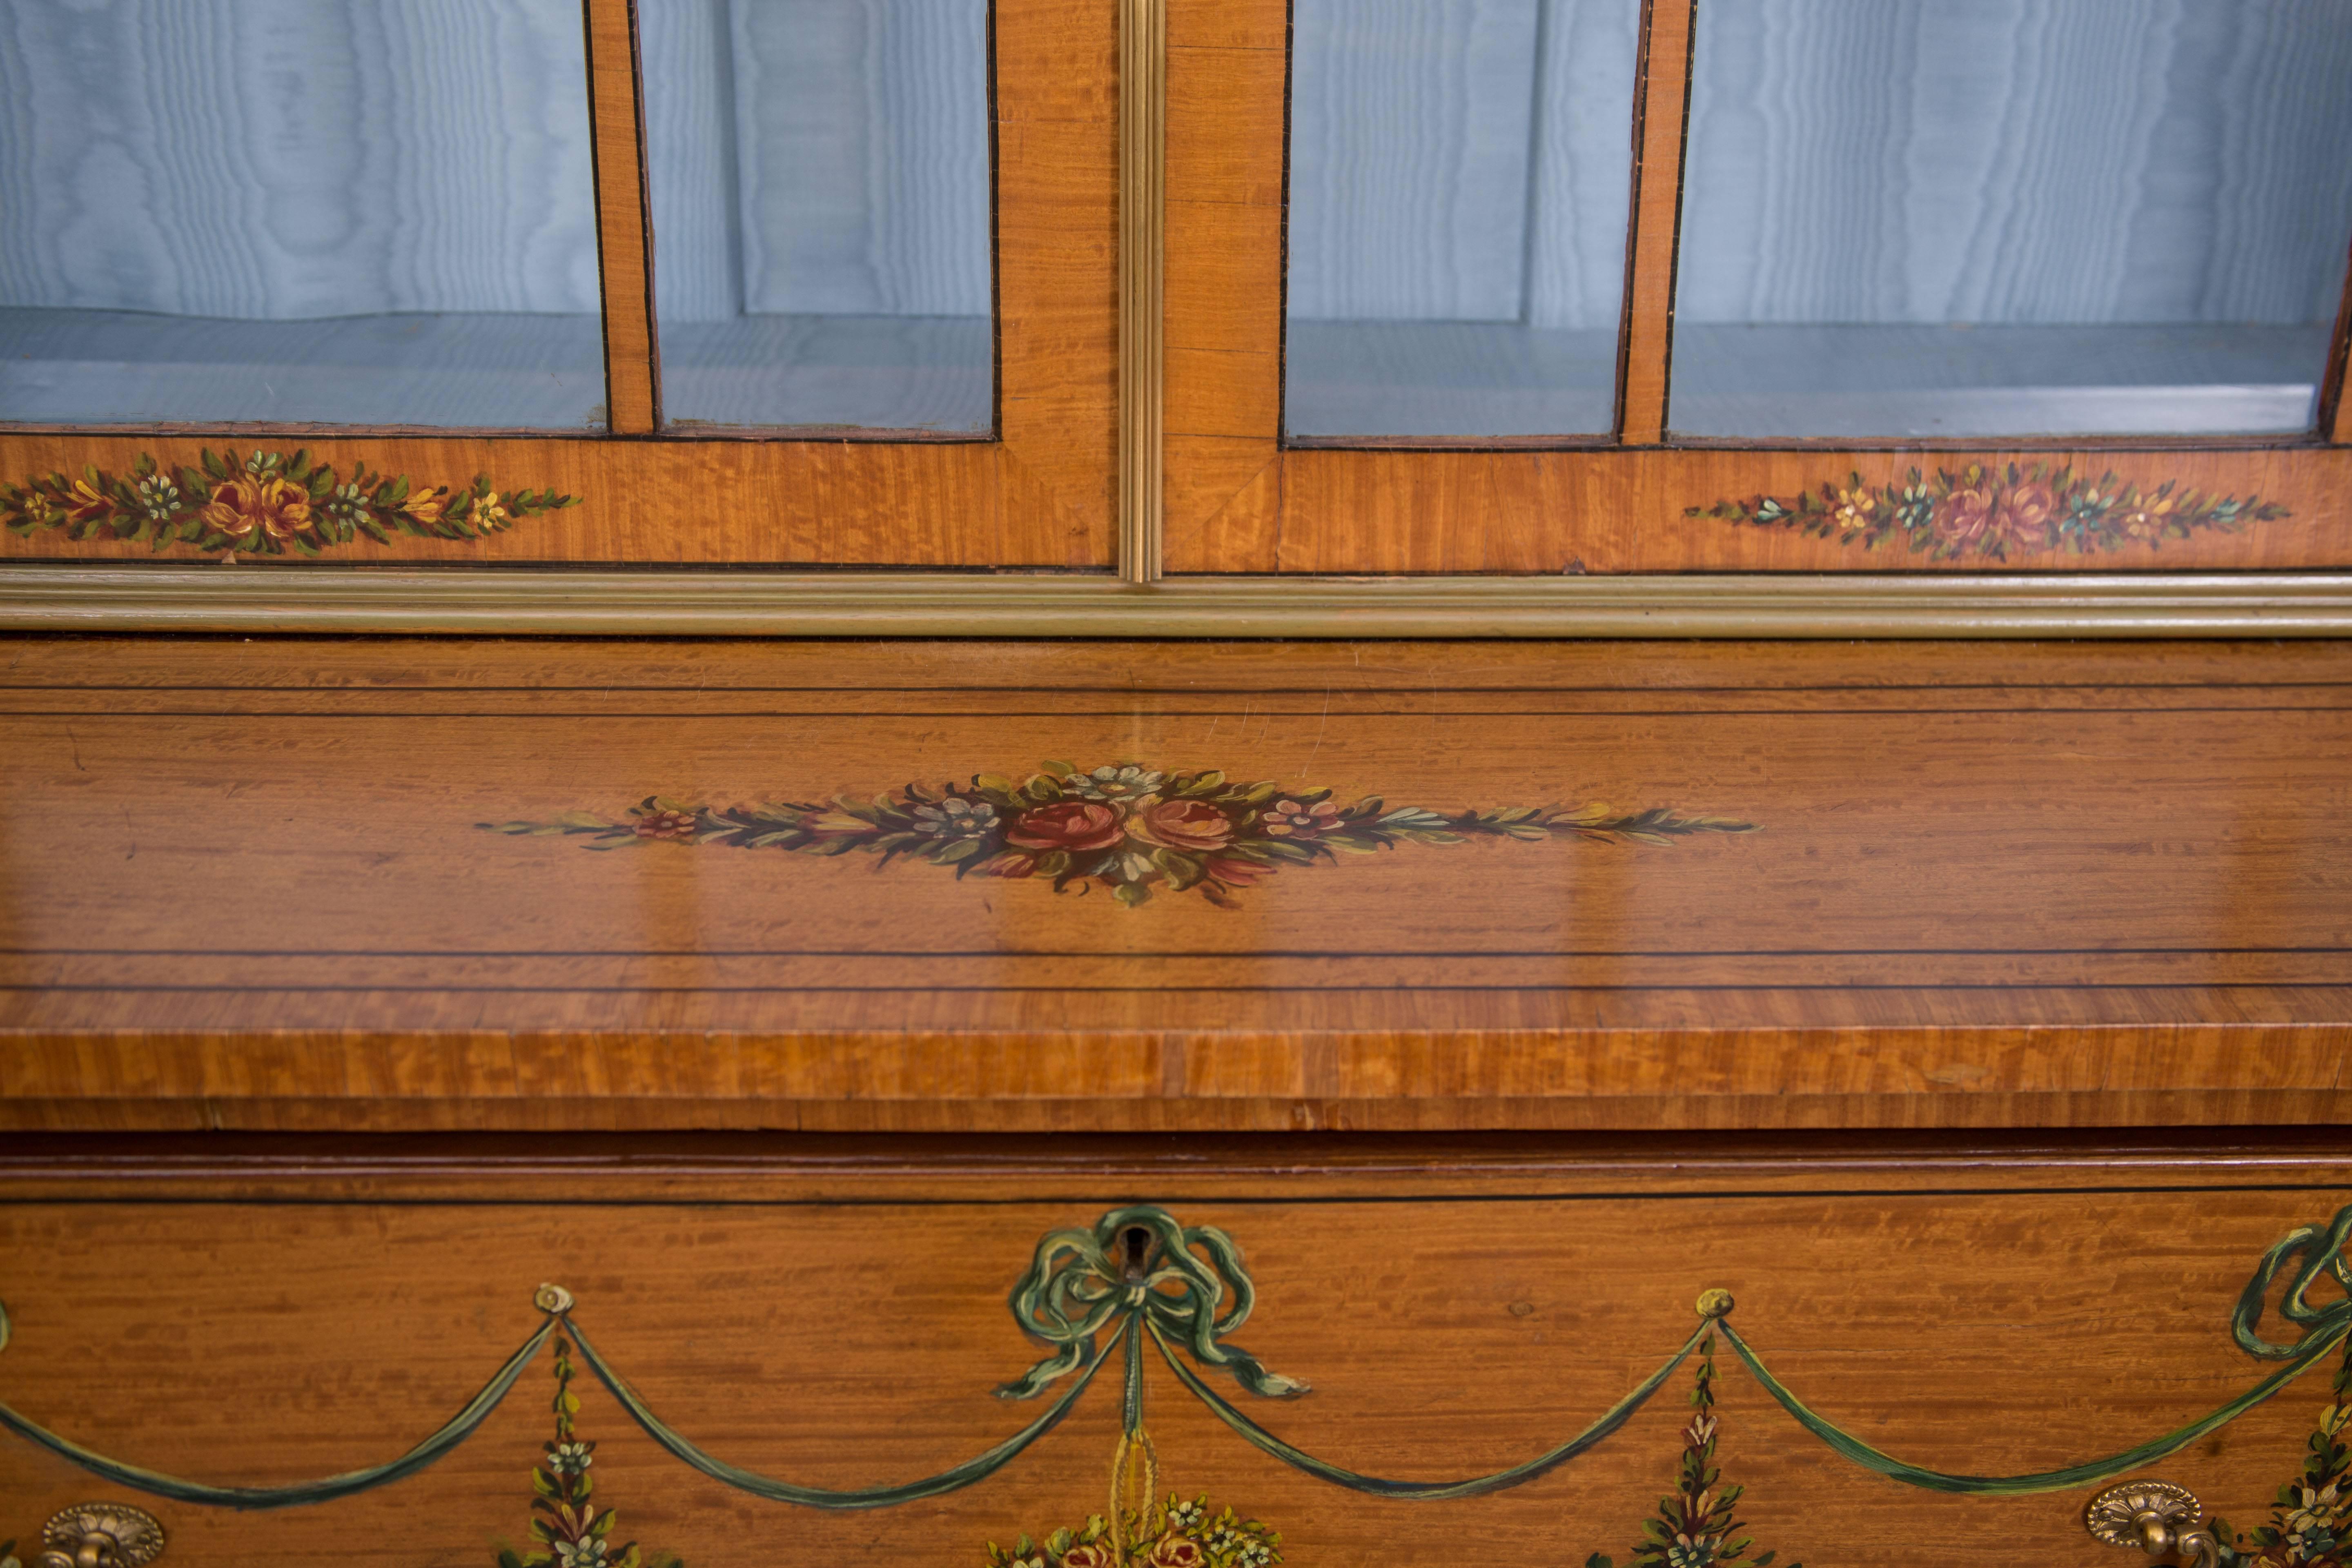 This is a fine example of an English Adams style painted satinwood secretary painted overall with delicate flowers and swags. The top section has a prominent cornice over two glazed astragal doors with arched mullions, opening to reveal sky blue